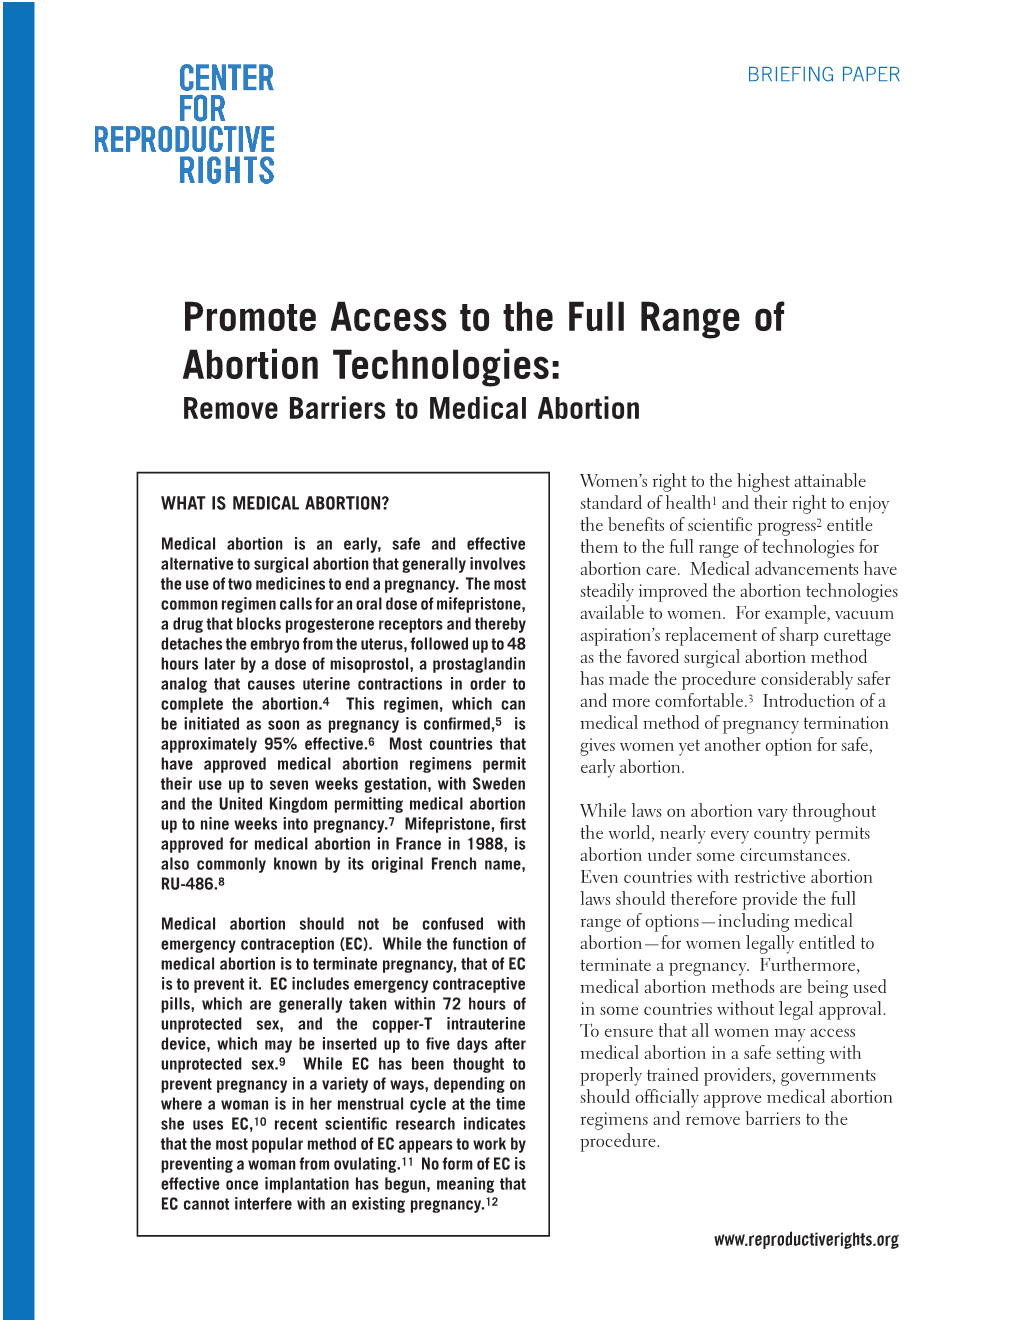 Promote Access to the Full Range of Abortion Technologies: Remove Barriers to Medical Abortion